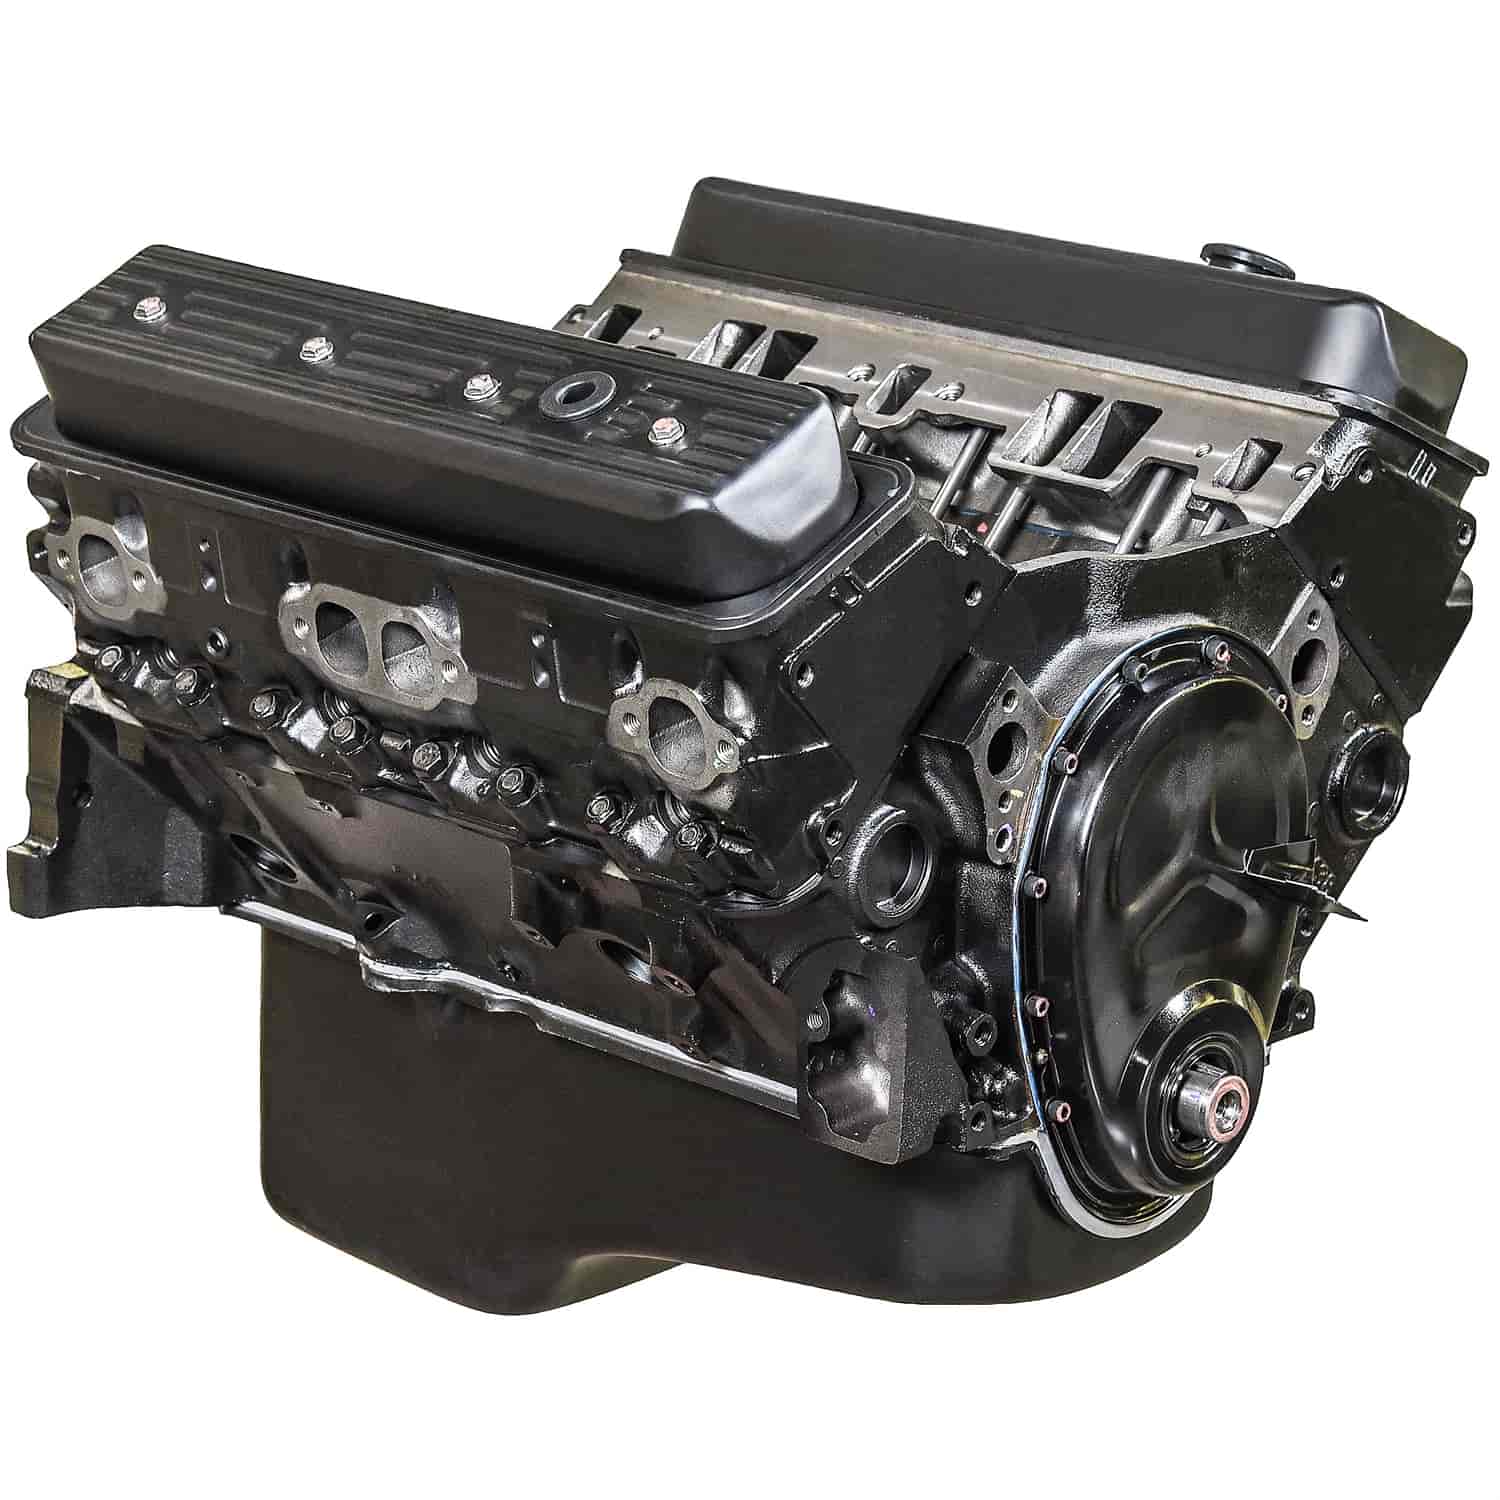 Chevy Tbi 350 Ci 5 7l Crate Engine Buy A 059 8758 Tbi 350 Ci 5 7l Replacement Crate Engine Online Jegs High Performance